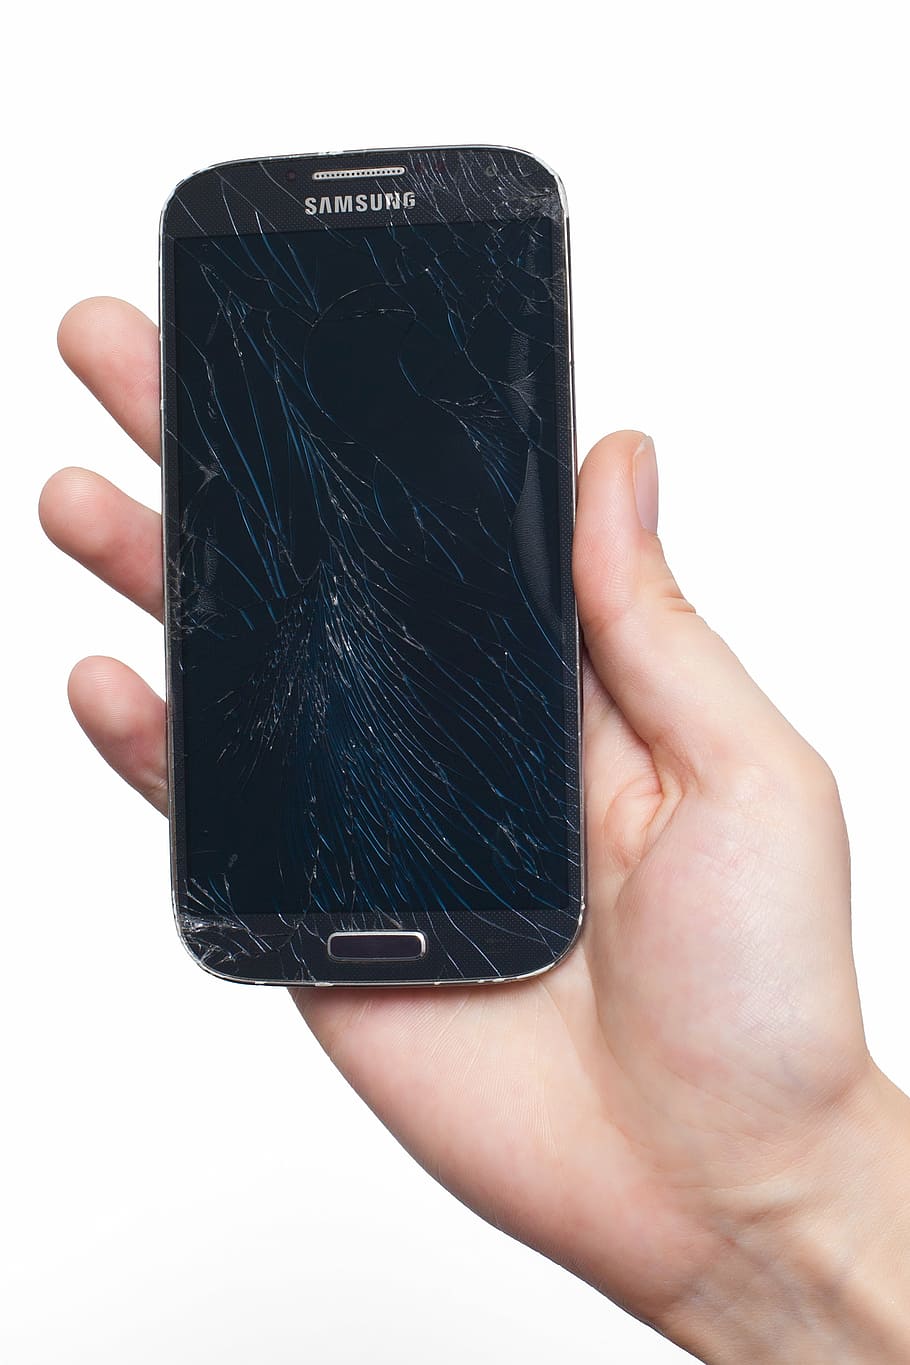 person, holding, black, samsung galaxy, s4, mobile phone, smartphone, display, screen, damage